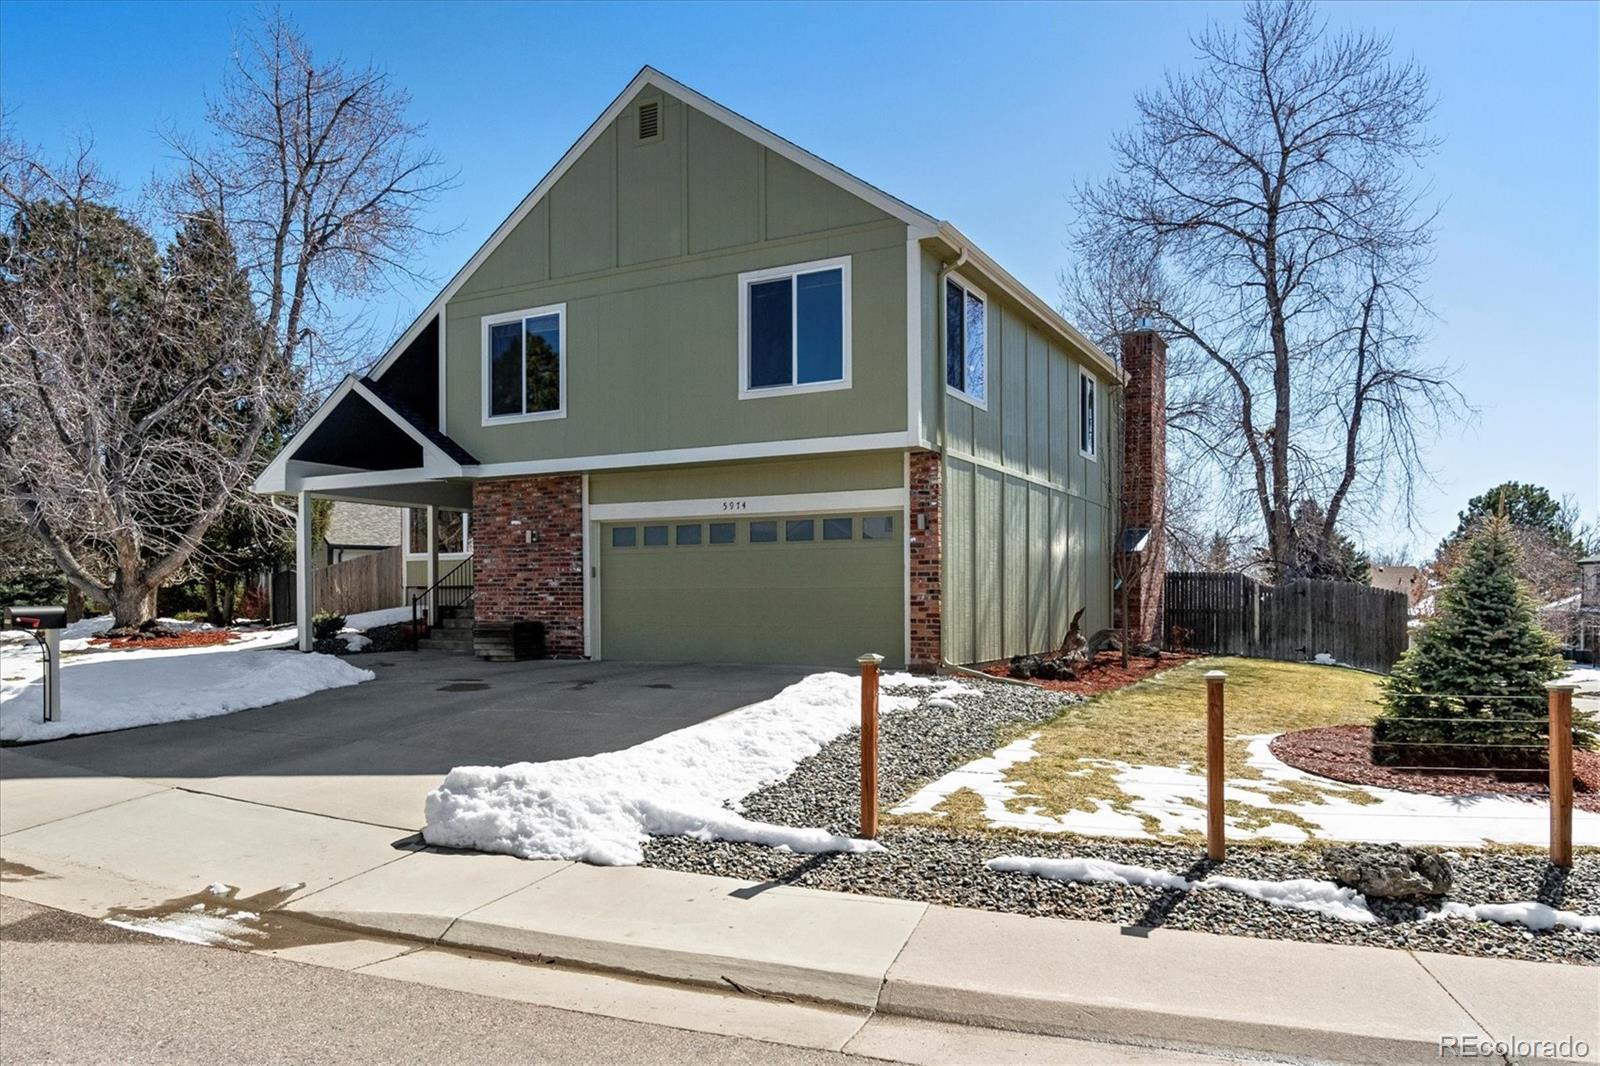 Report Image for 5974 S Lee Way,Littleton, Colorado